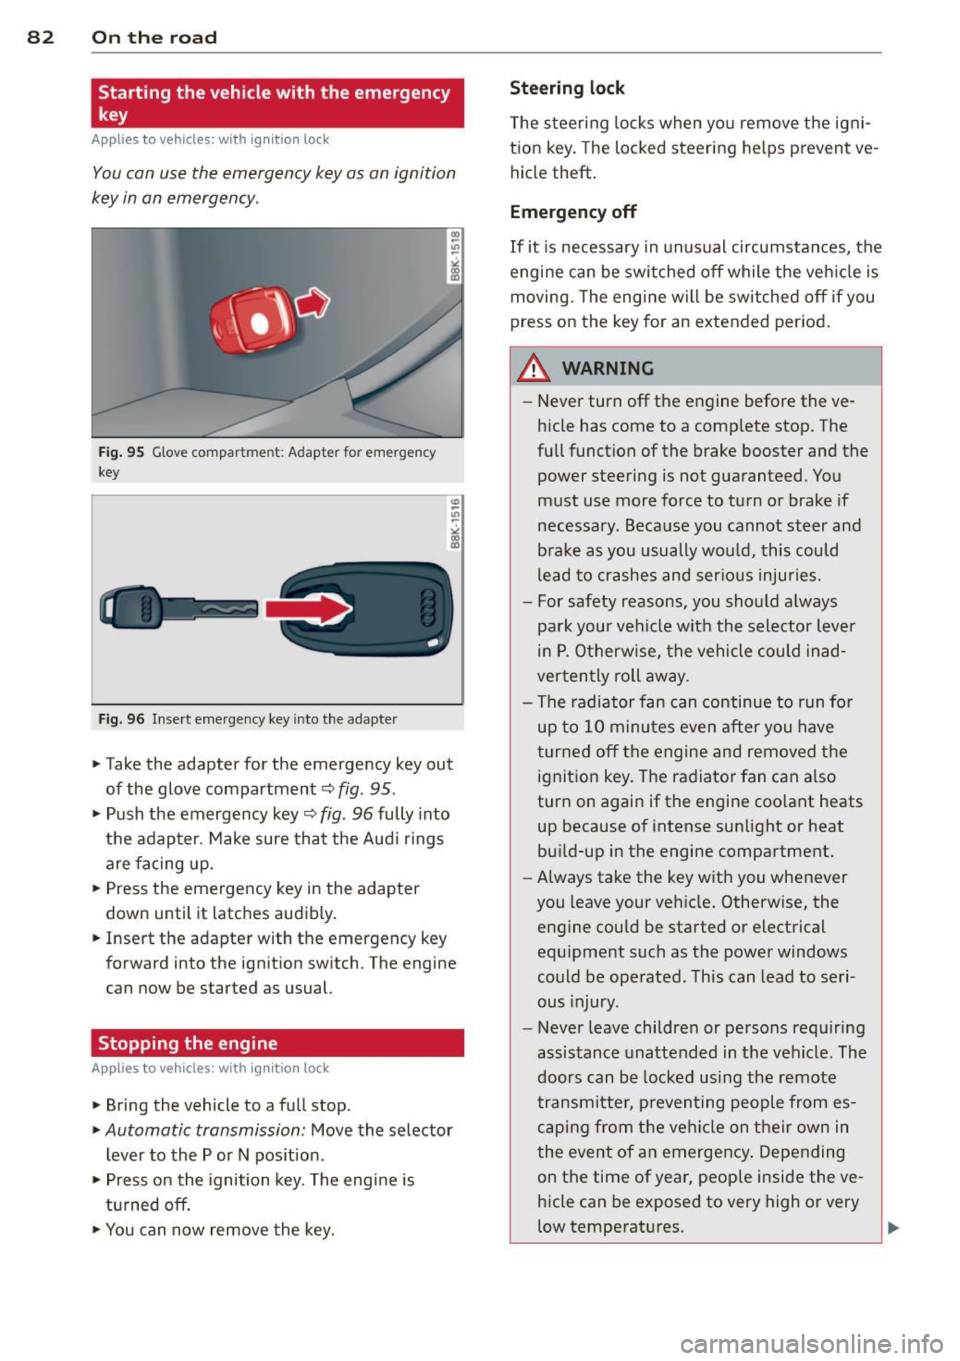 AUDI S4 2014  Owners Manual 82  On  the  road 
Starting  the  vehicle  with  the  emergency 
key 
Applies to  vehicles:  with ig ni tion  lock 
You can use  the  emergency  key as  an ignition 
key  in on emergency. 
Fig. 95 G l